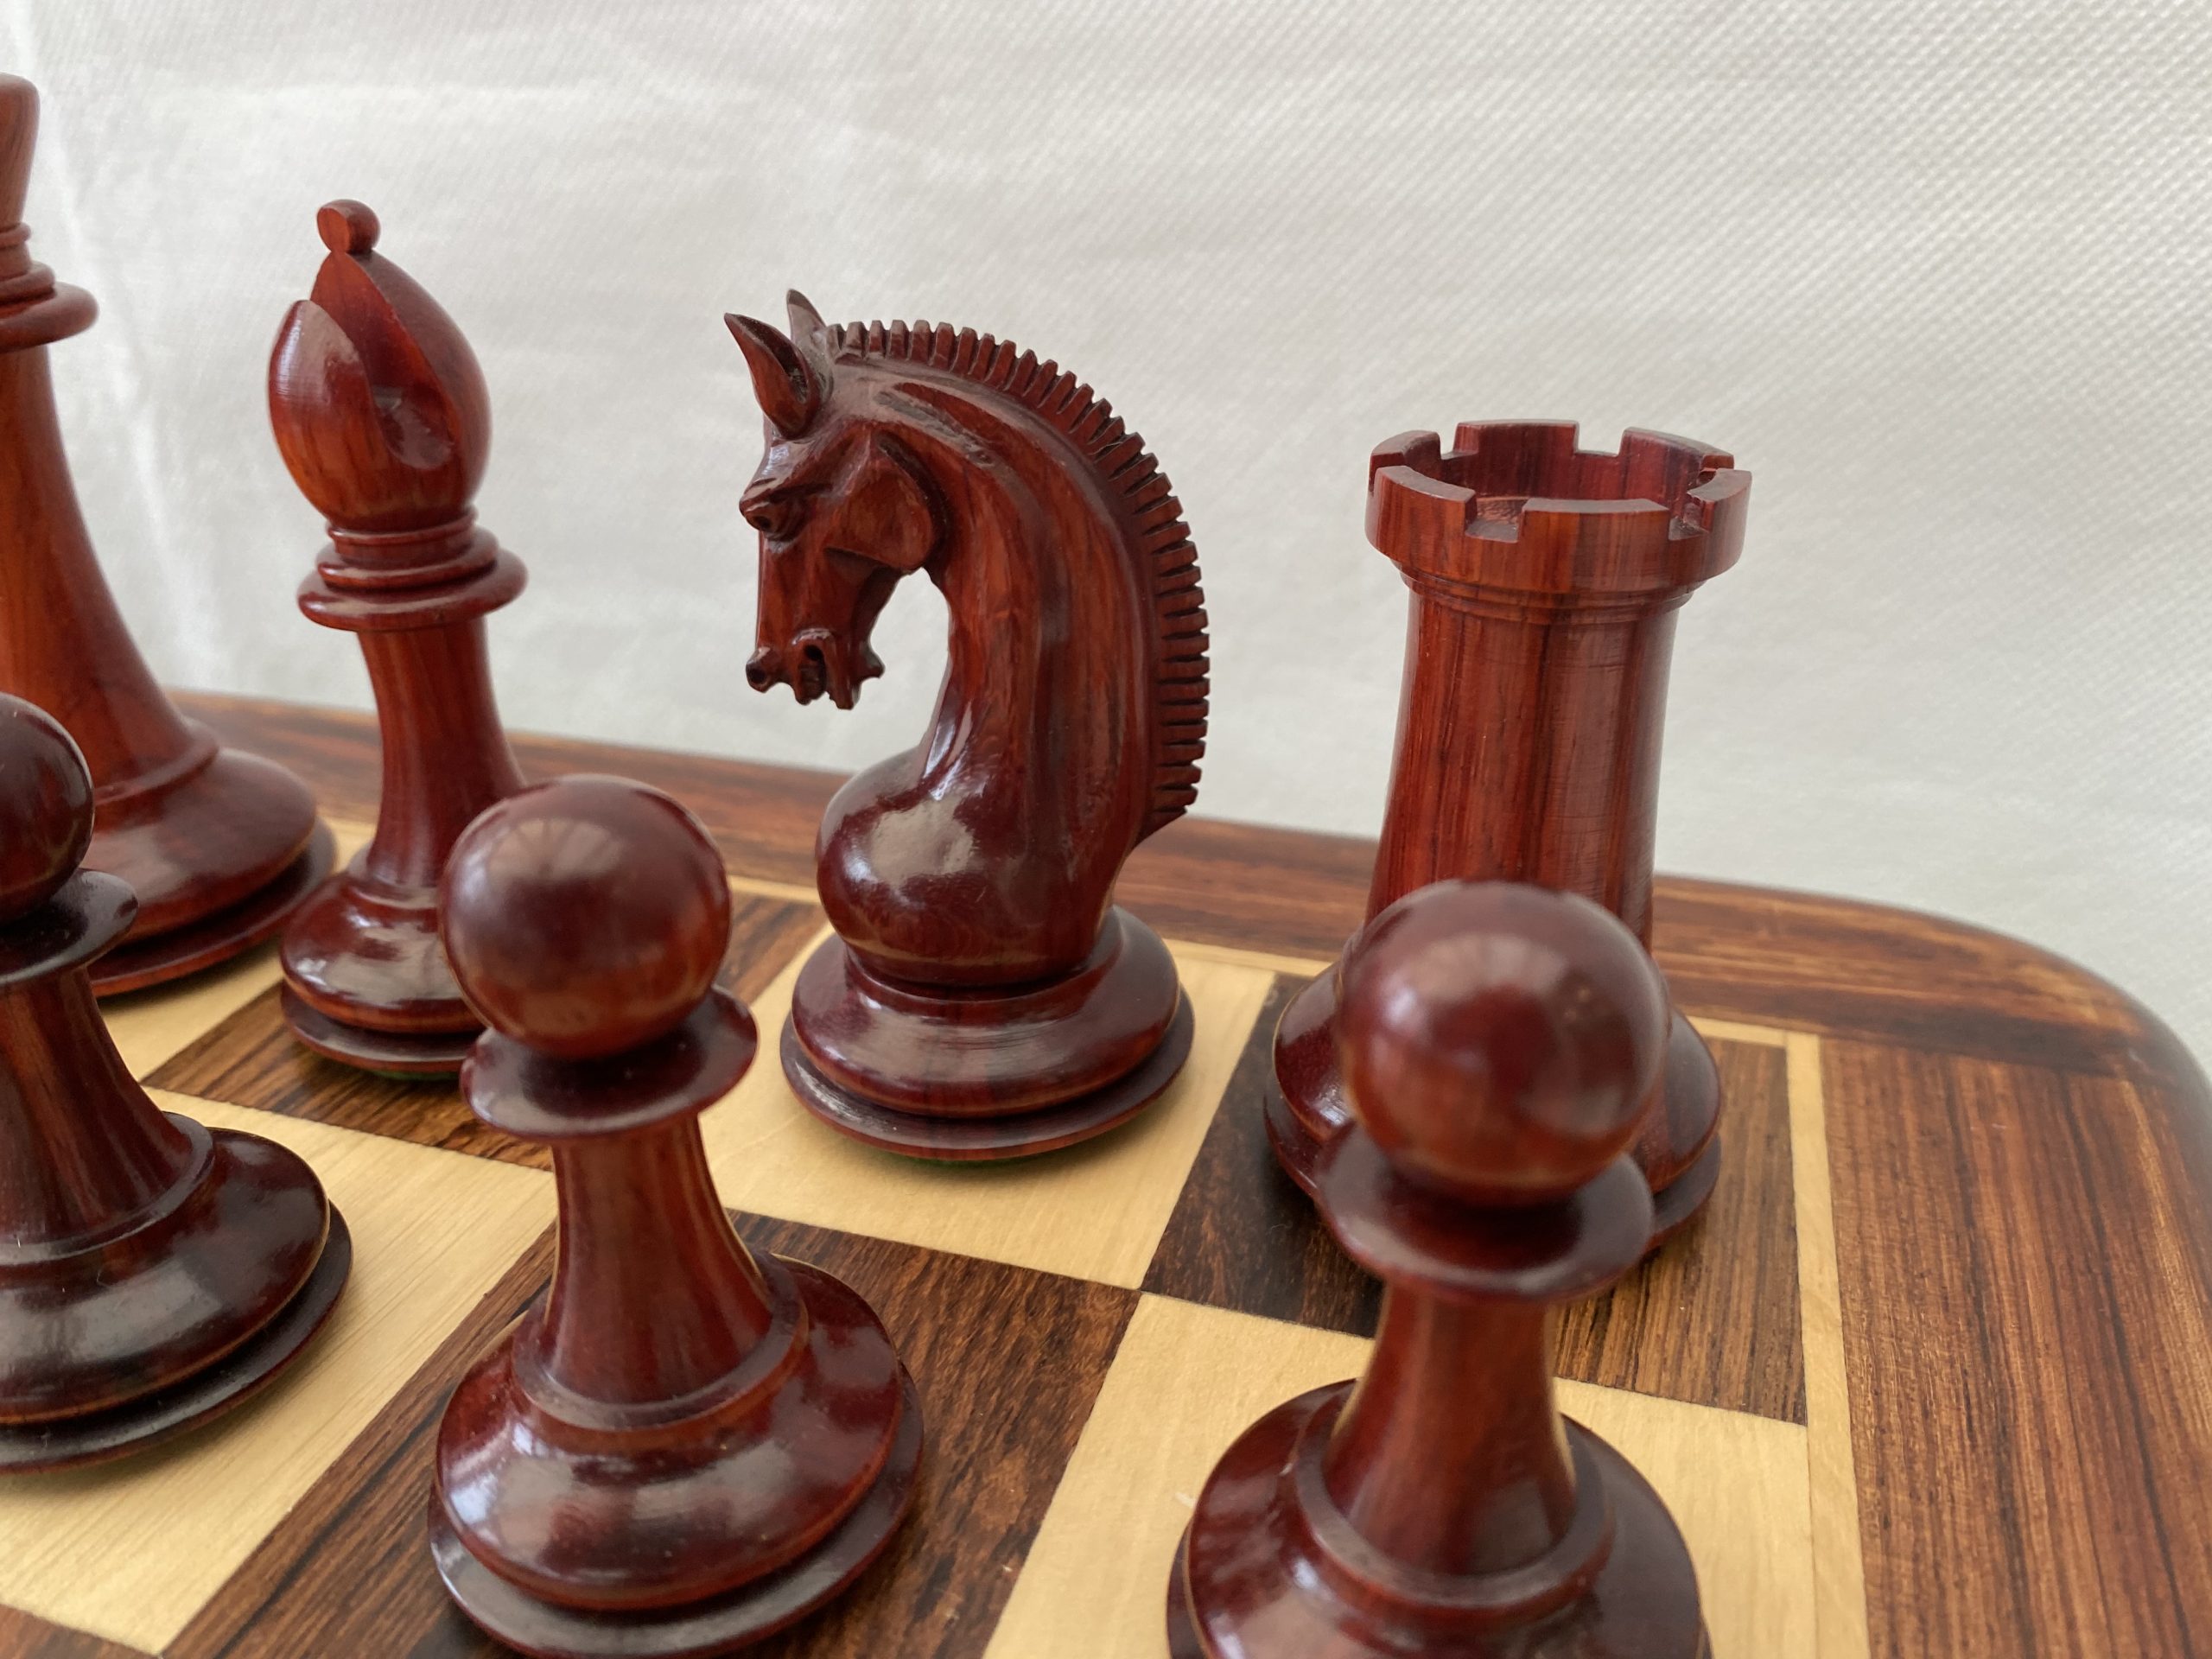 Chess Sets at Official Staunton UK Online Store